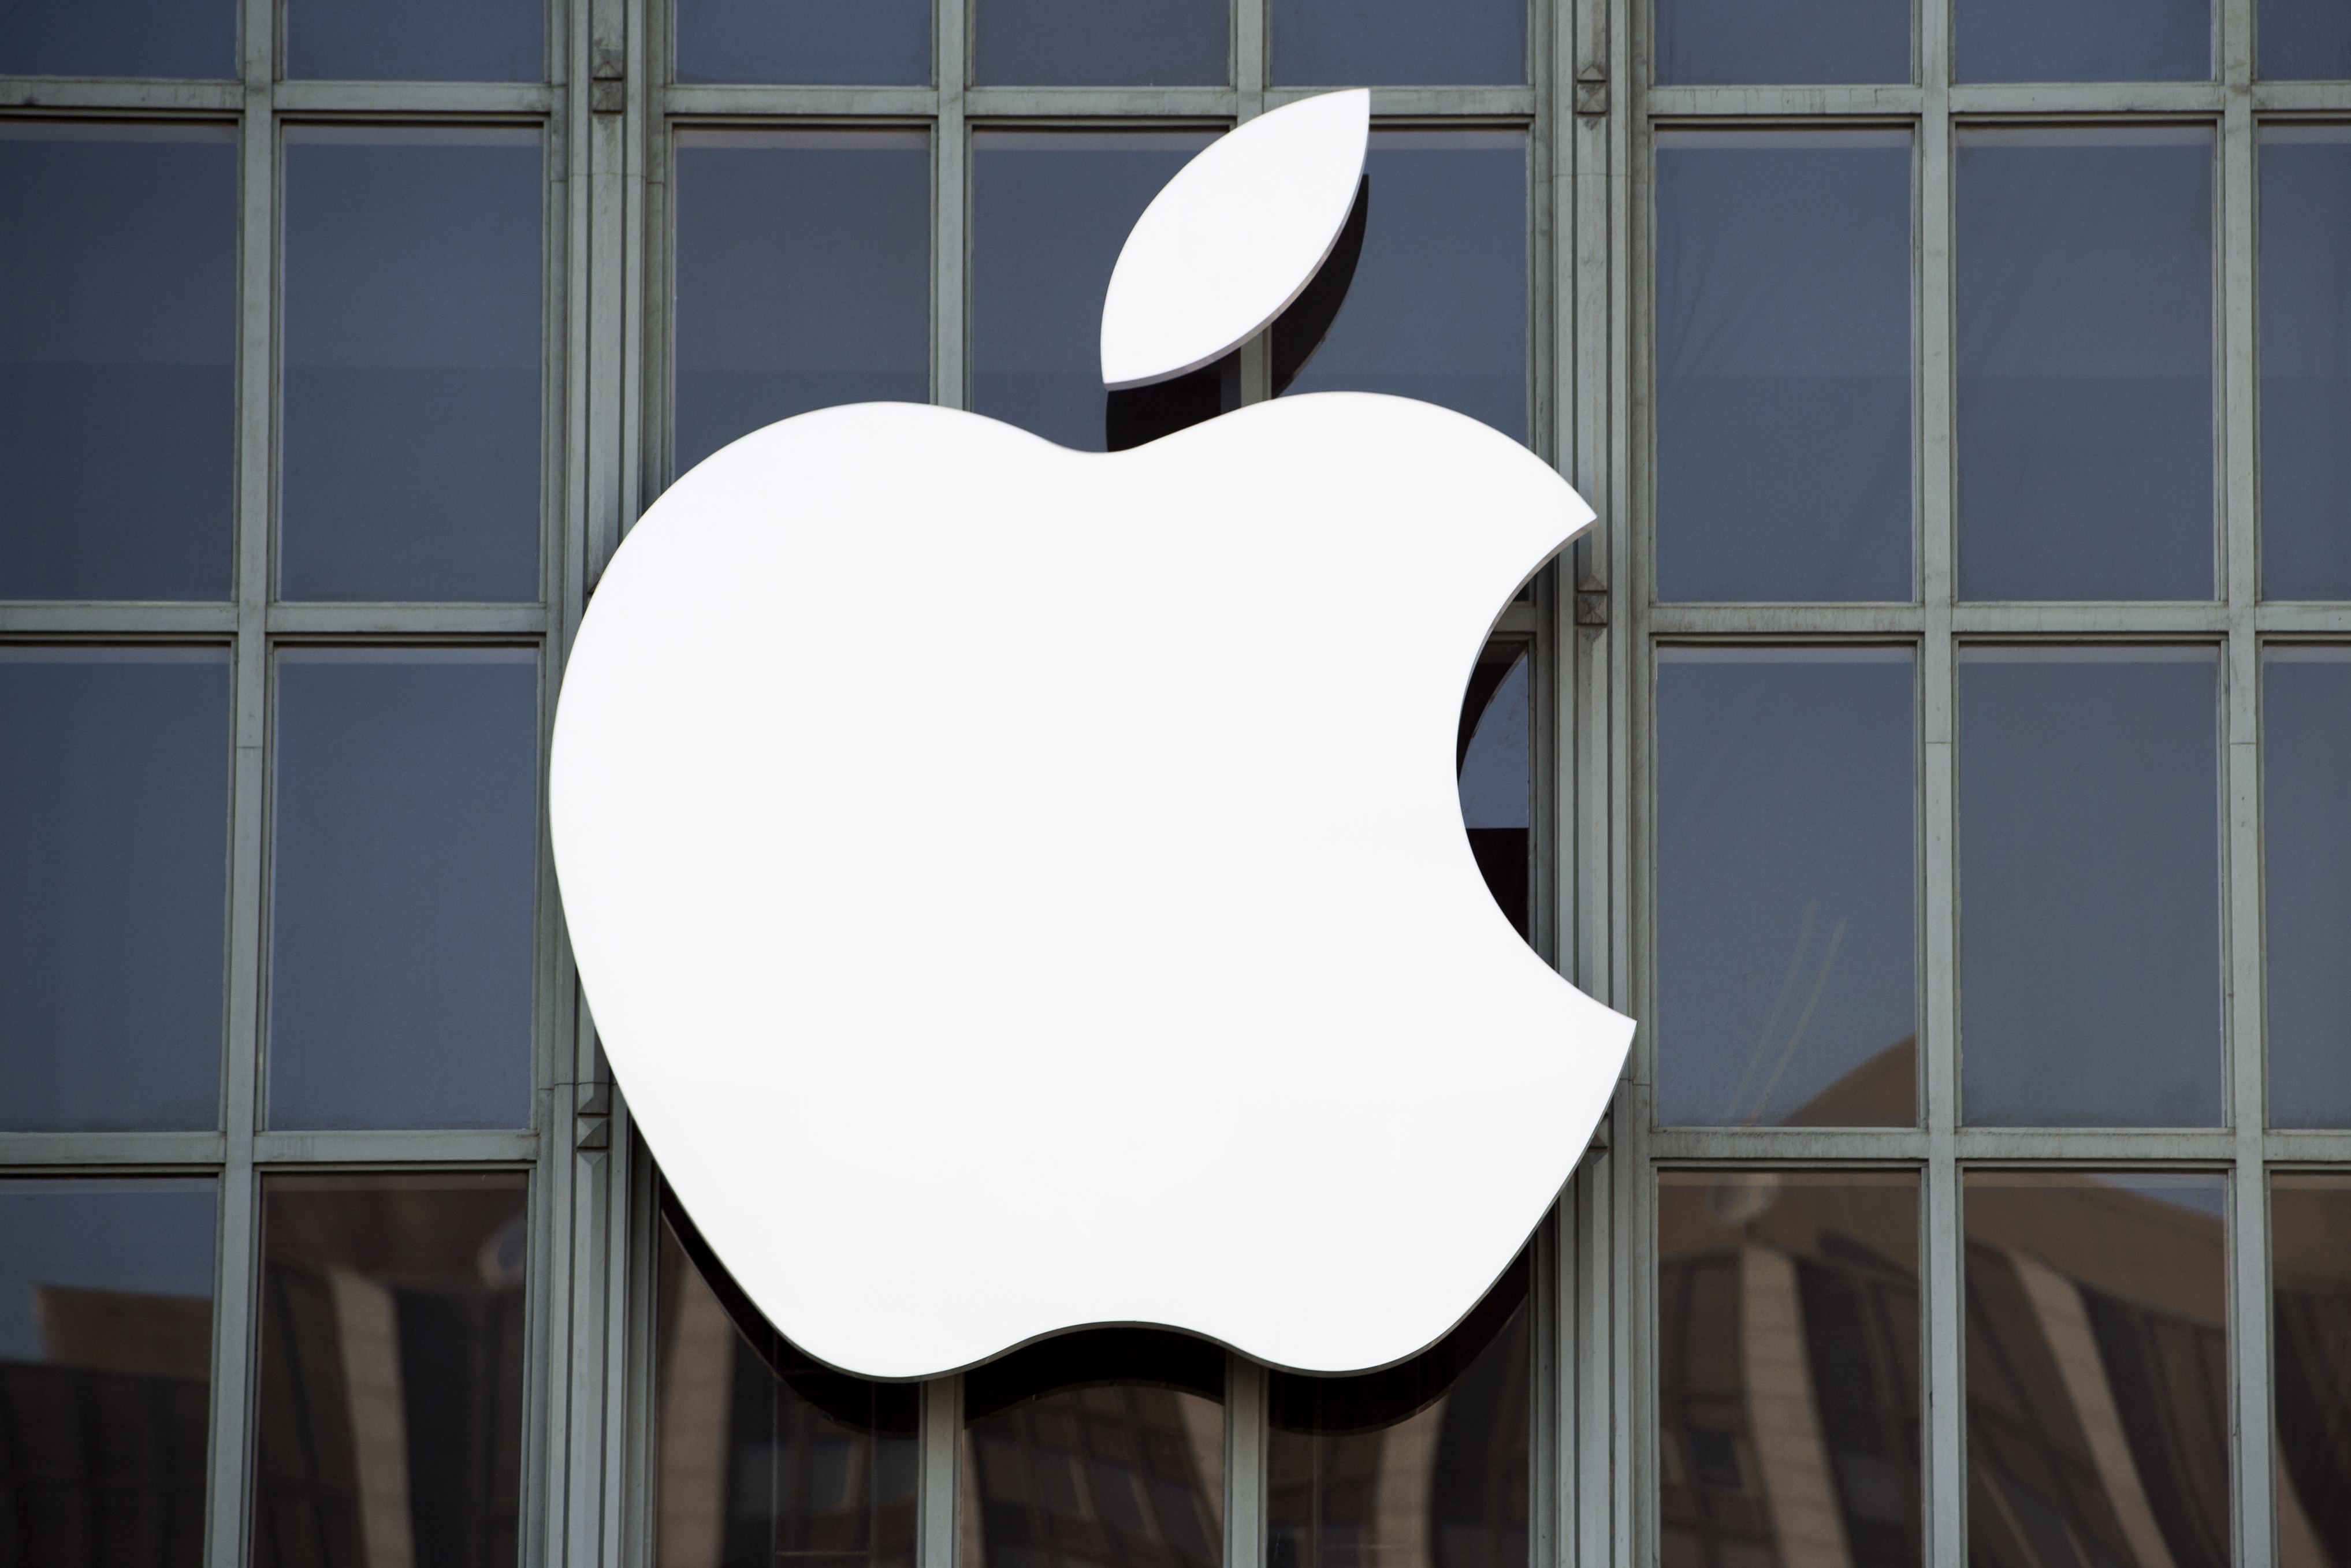 The Apple logo is seen on the outside of Bill Graham Civic Auditorium before the start of an event in San Francisco, California on September 7, 2016. Apple on Wednesday is expected to introduce a new iPhone and perhaps a second-generation smartwatch as it polishes its lineup of devices to shine during the year-end shopping season. The rumor mill has been grinding away with talk of iPhone 7 models that will boast faster chips, more sophisticated cameras, and improved software while doing away with jacks for plugging in wired headphones.  / AFP PHOTO / Josh Edelson